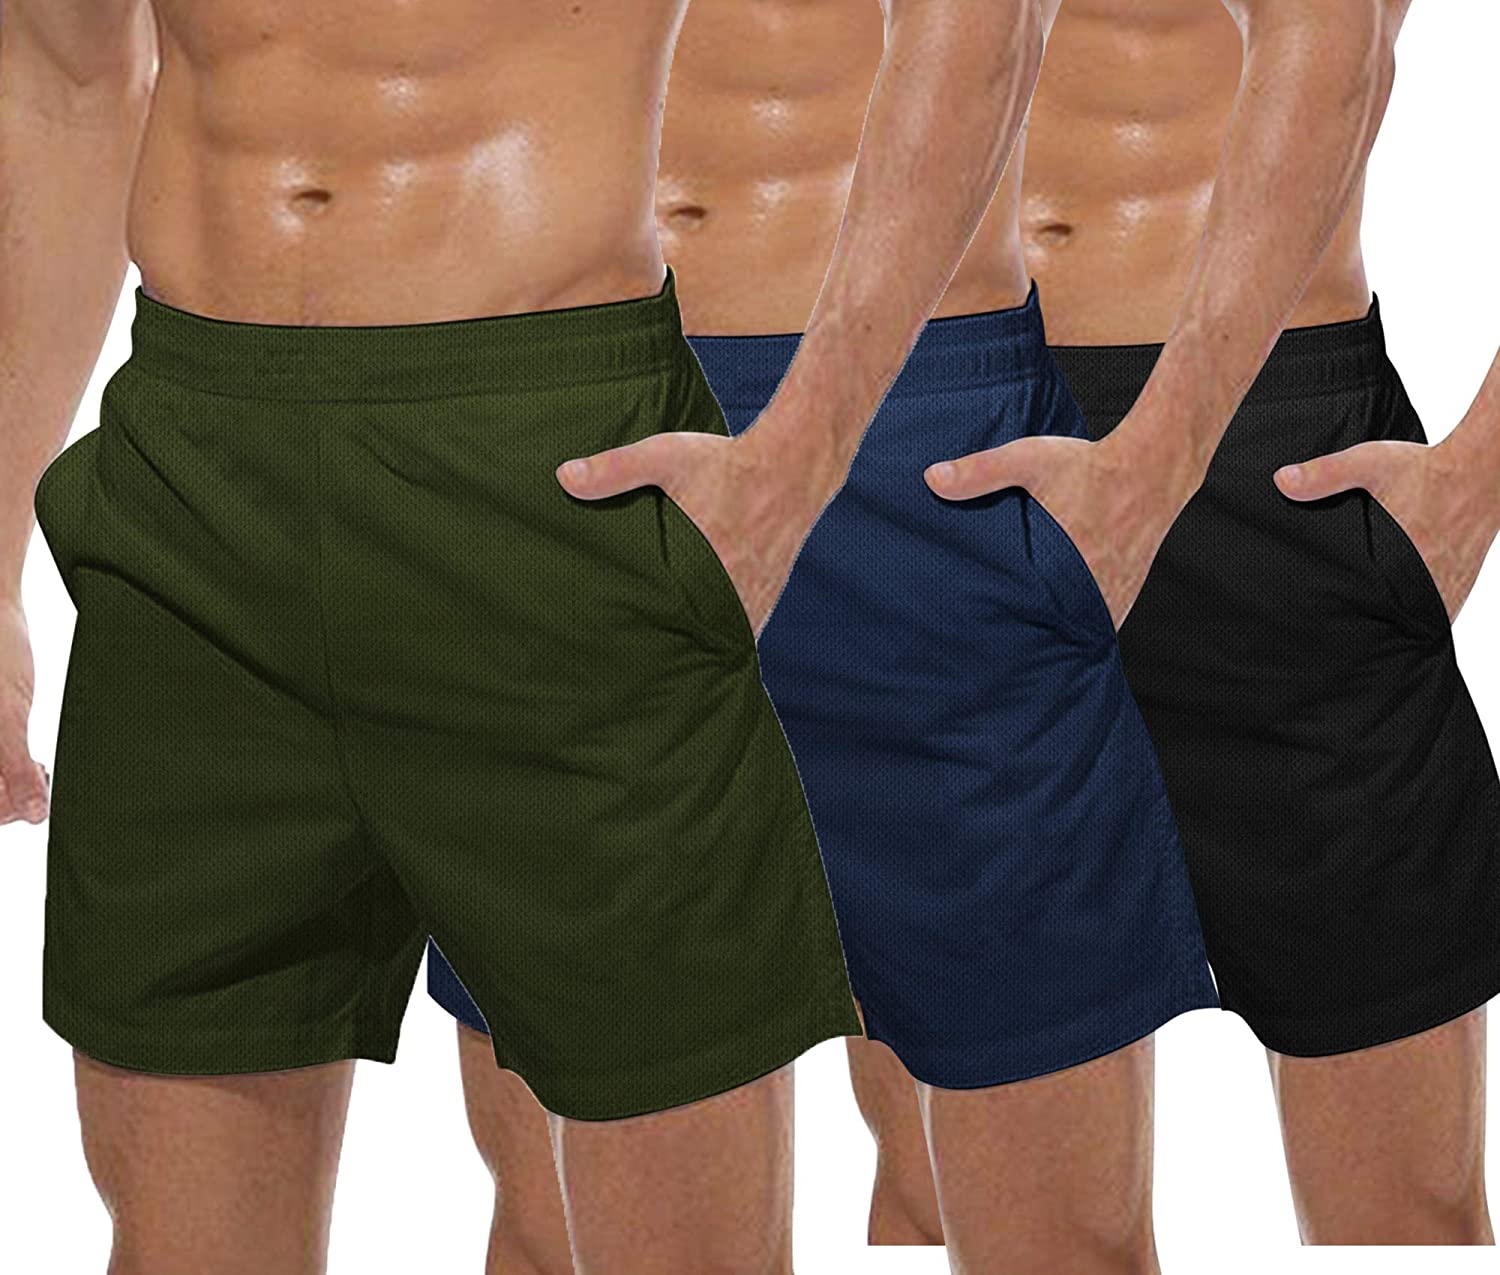 COOFANDY Men's 3 Pack Gym Workout Shorts Mesh Weightlifting Squatting ...